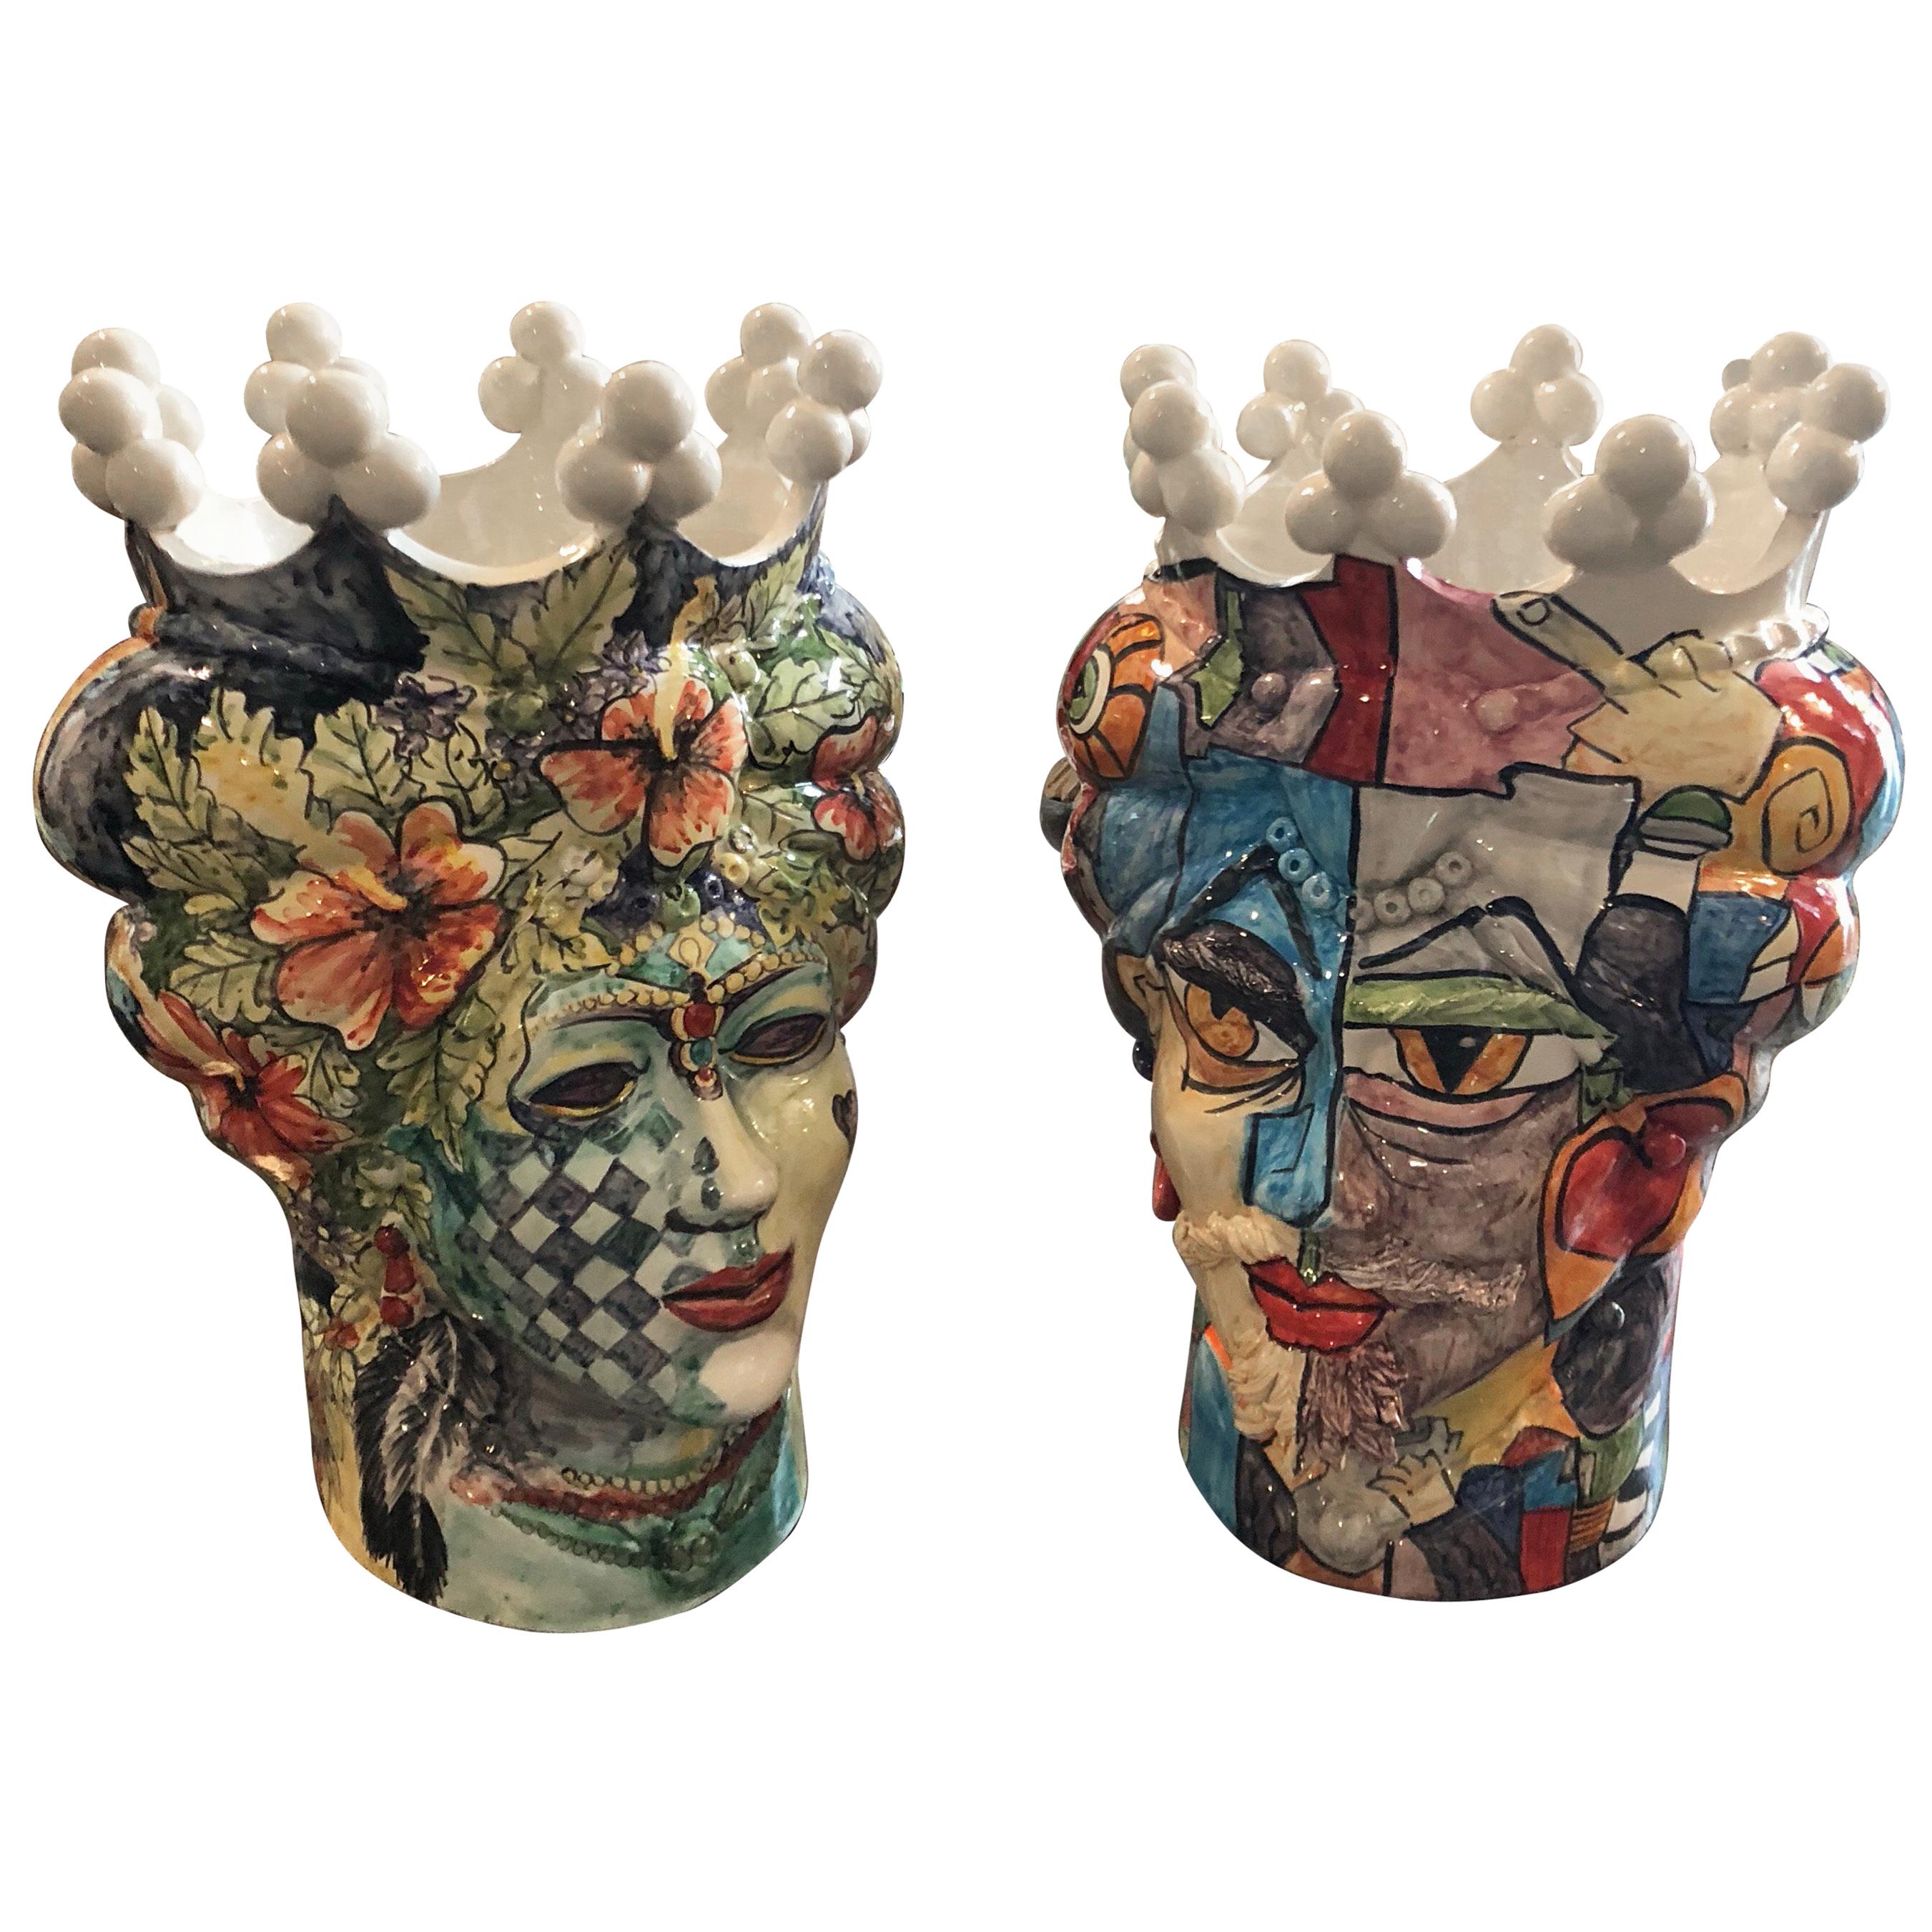 Unique Pair of Sicilian Hand-Painted Clay Moro’s Heads Vases in Pop Art Style